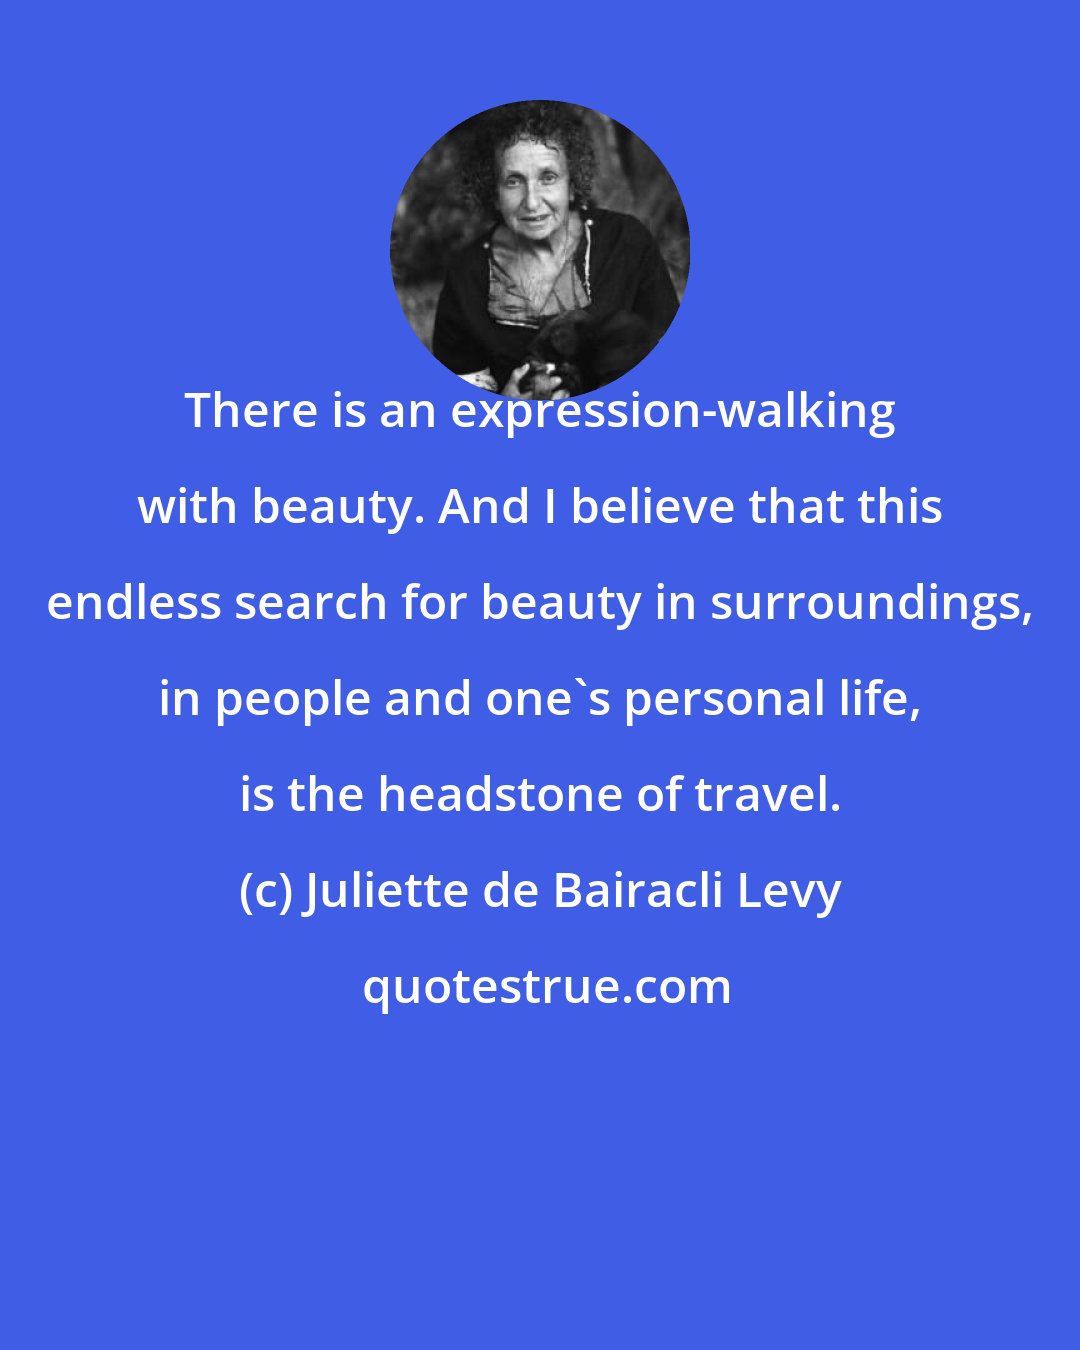 Juliette de Bairacli Levy: There is an expression-walking with beauty. And I believe that this endless search for beauty in surroundings, in people and one's personal life, is the headstone of travel.